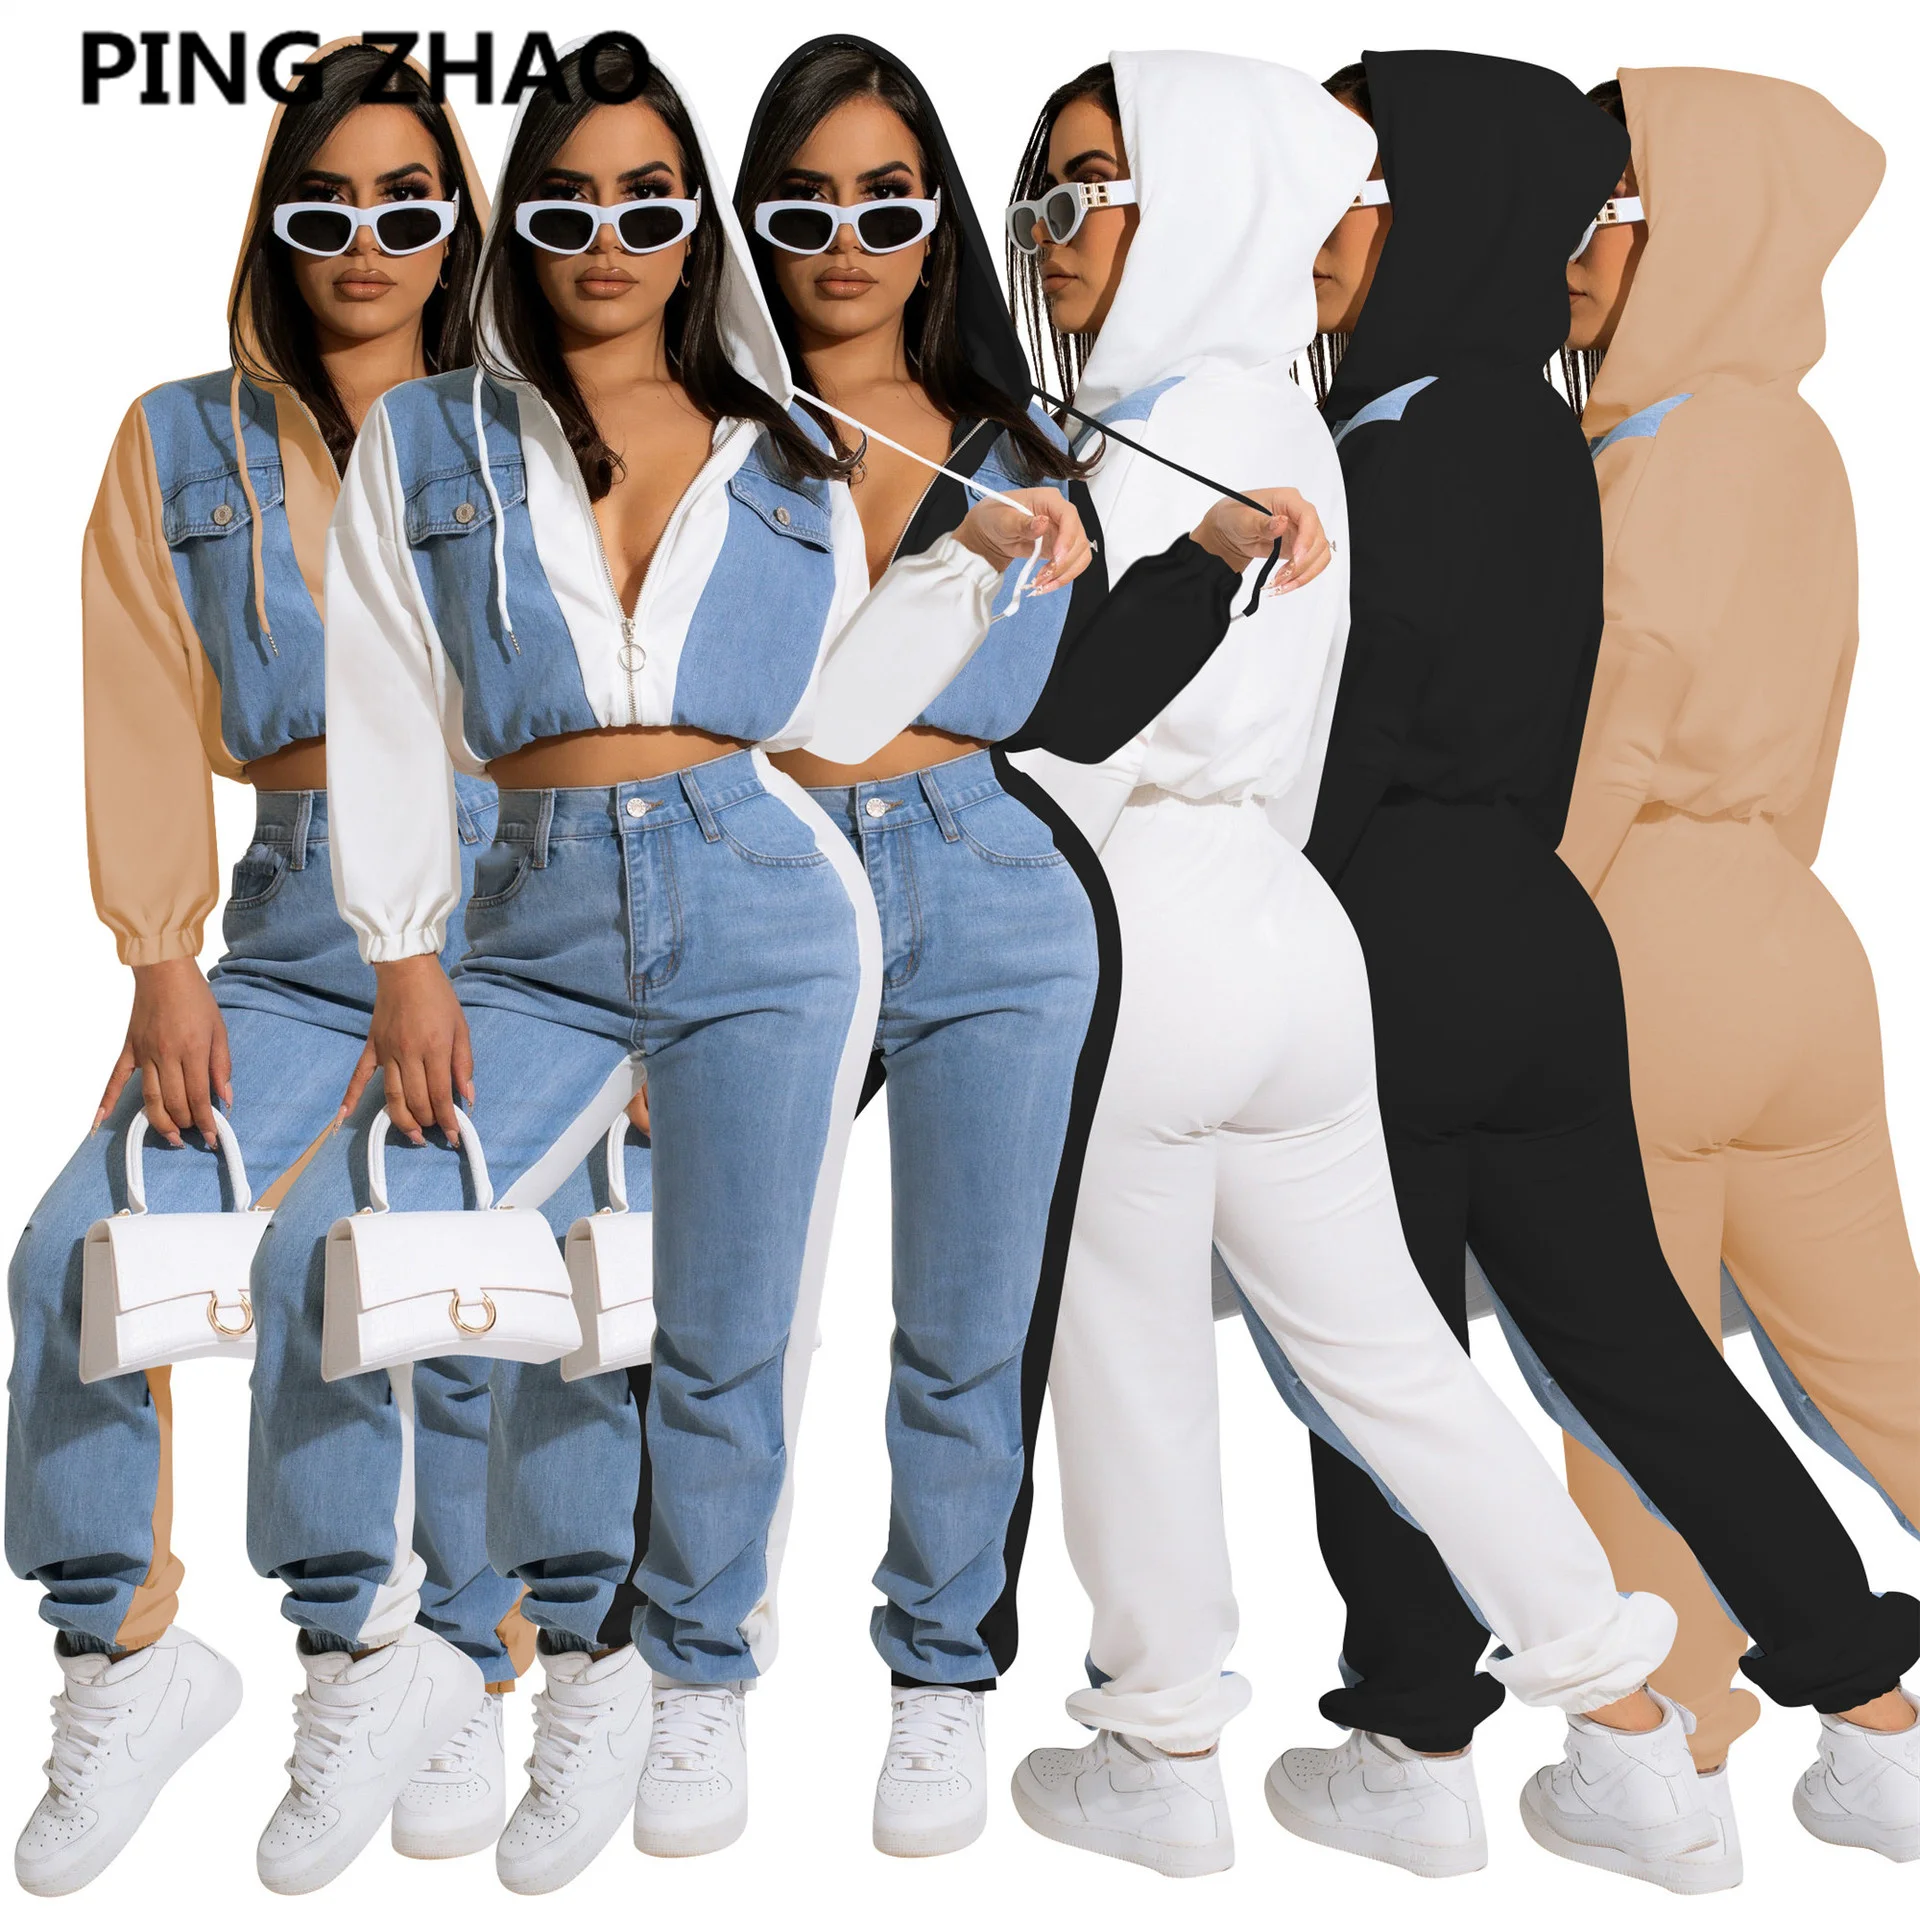 

PING ZHAO Denim Patchwork Women Two Piece Set Outfit 2022 Fashion Zipper Hooded Tops and Jogger Pants Matching Set Tracksuit